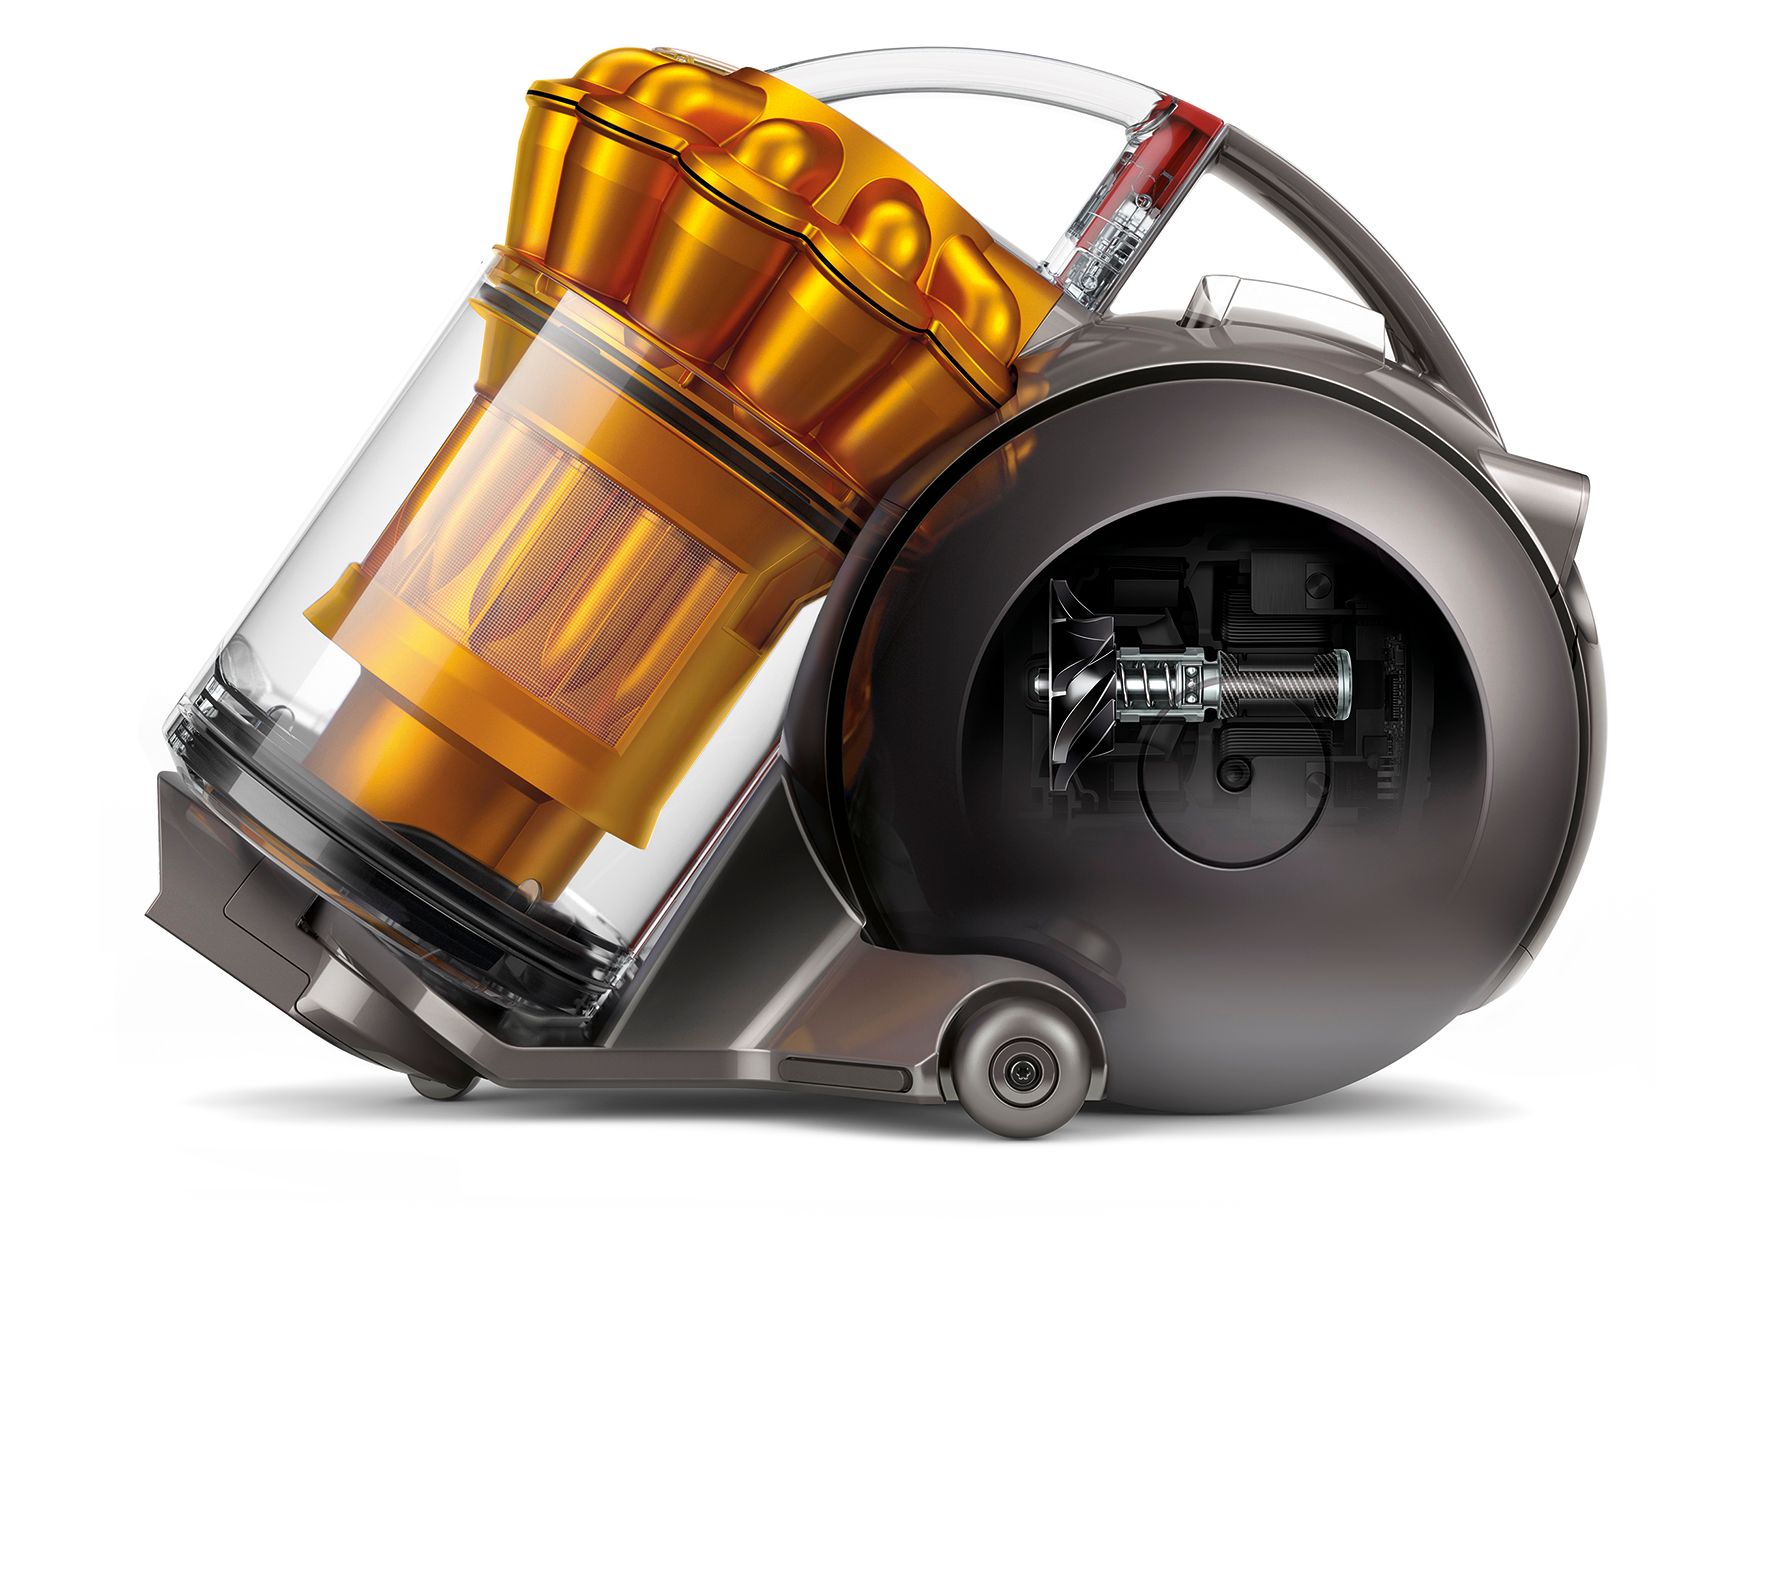 dyson dc49 mini vacuum cleaner that is no bigger than a sheet of a4 paper image 1